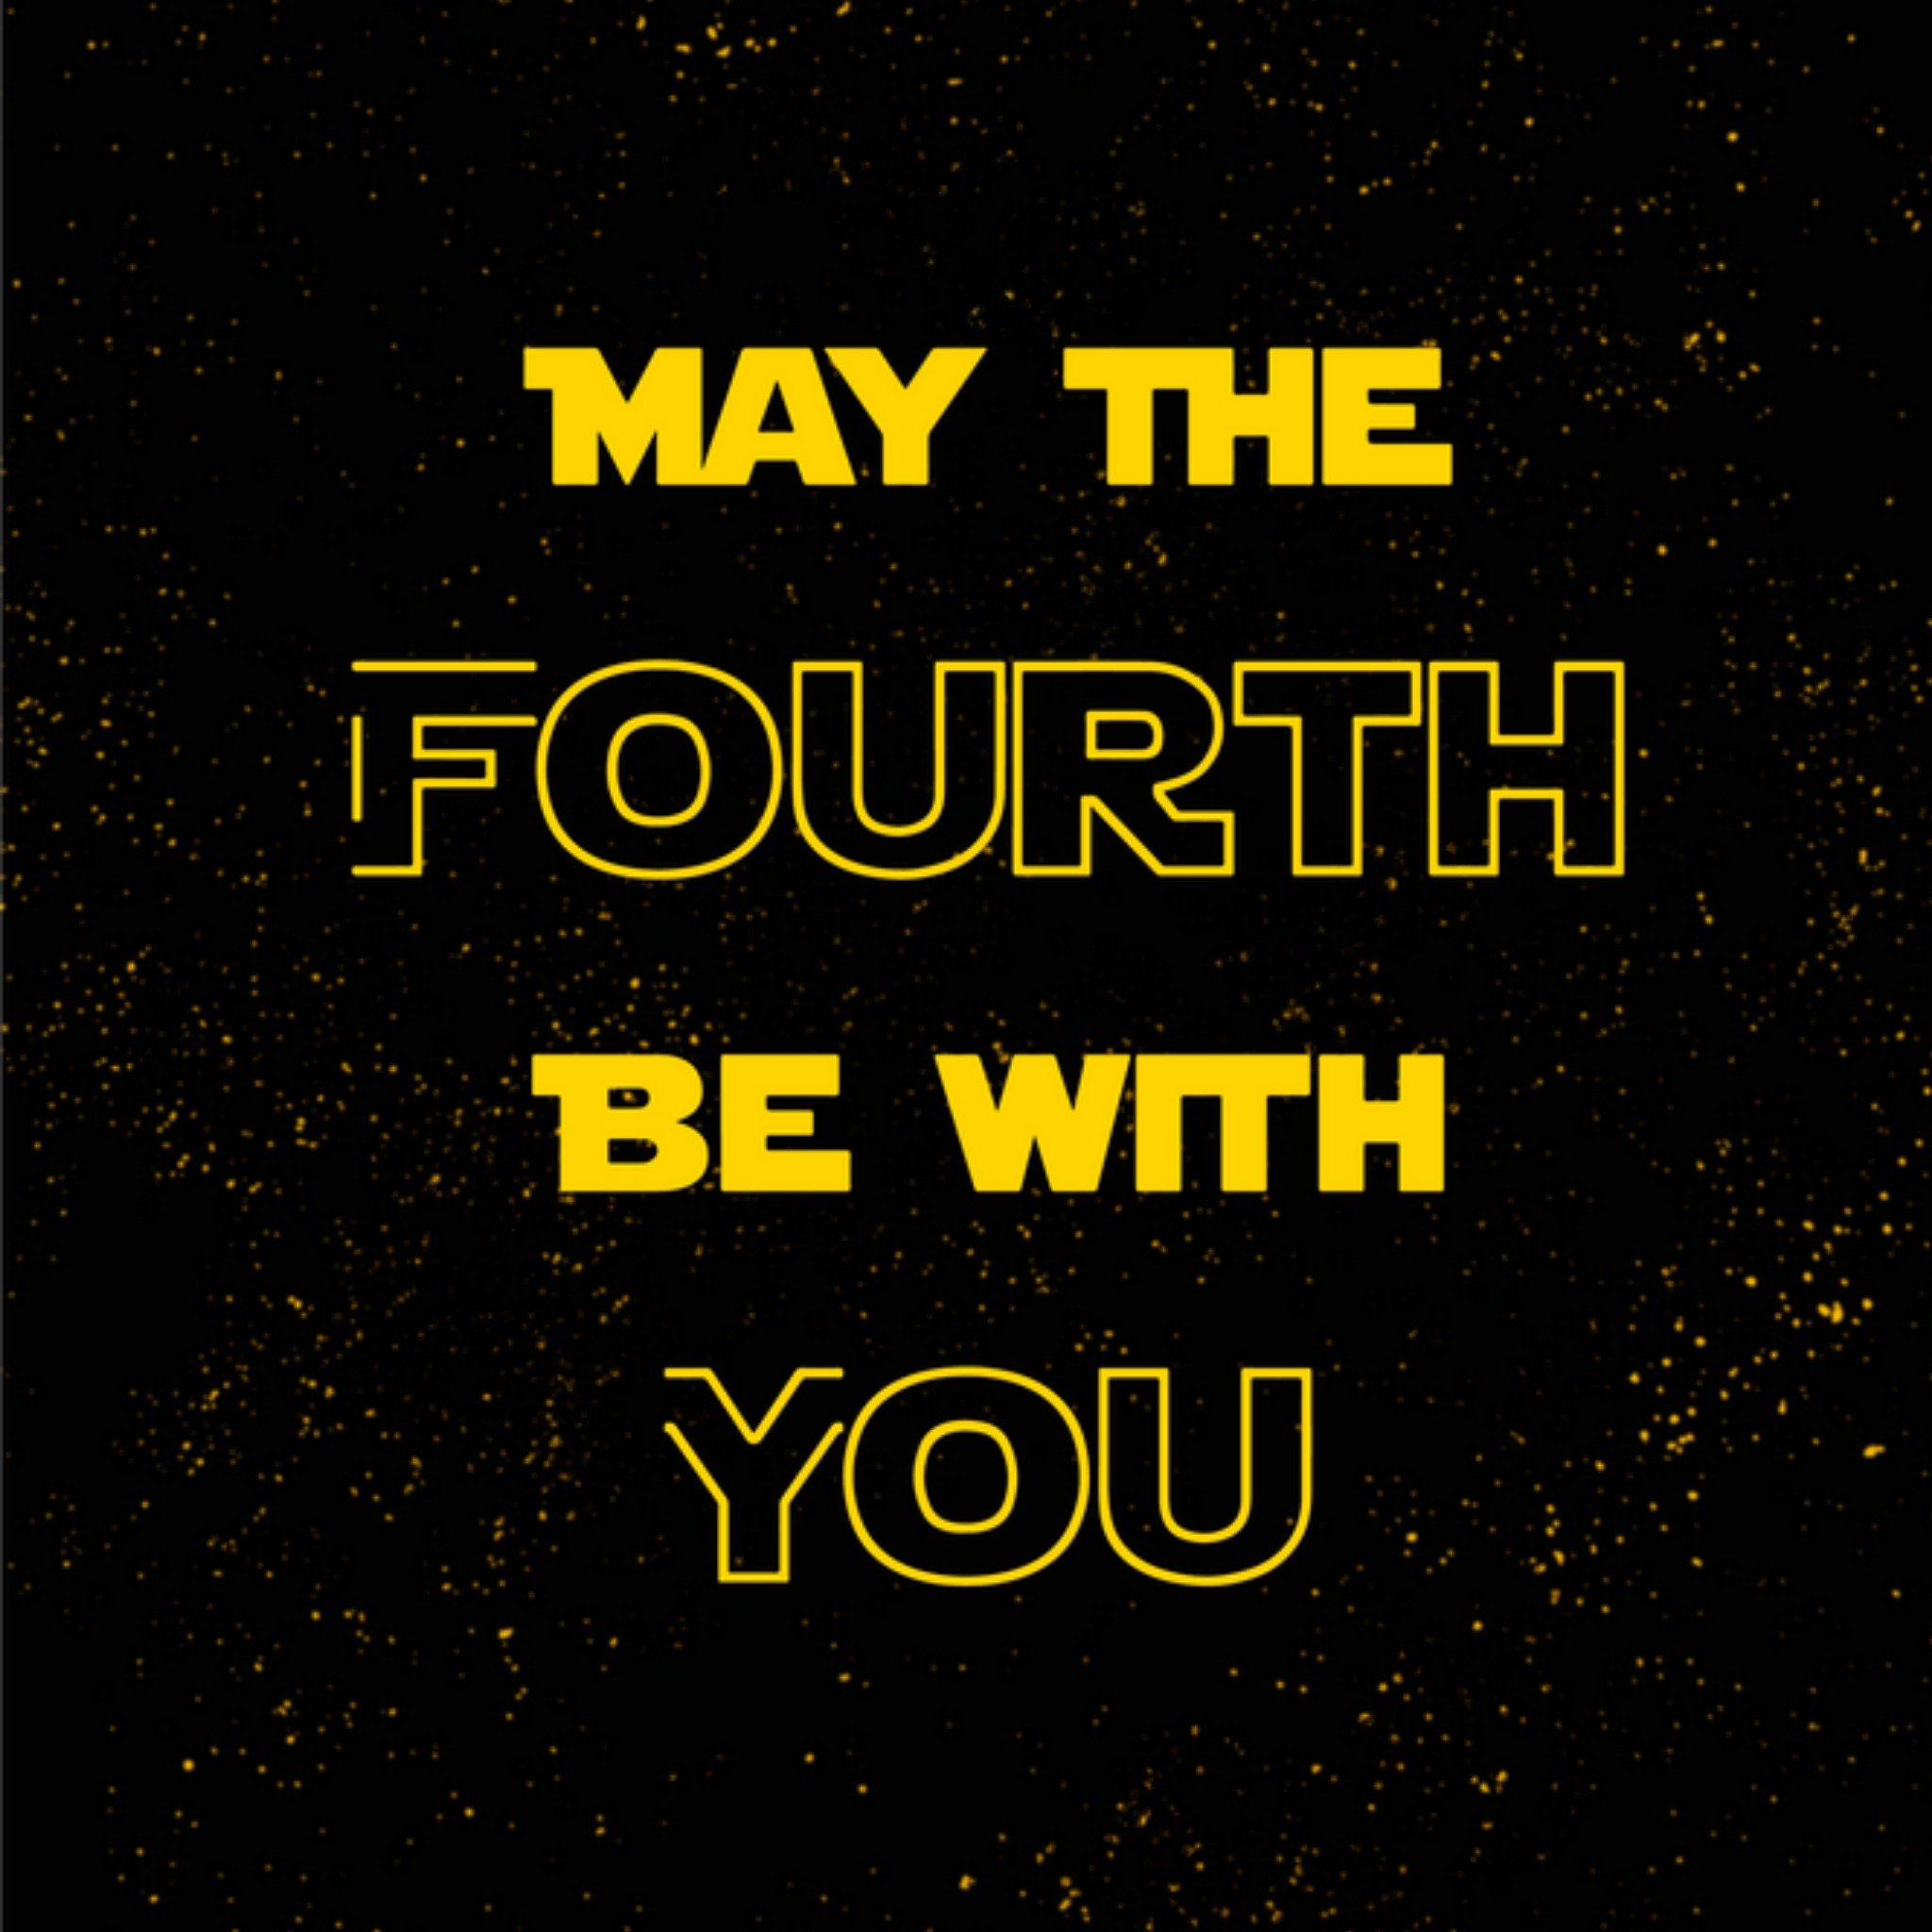 Zomaar kaart - Star Wars - May the fourth be with you